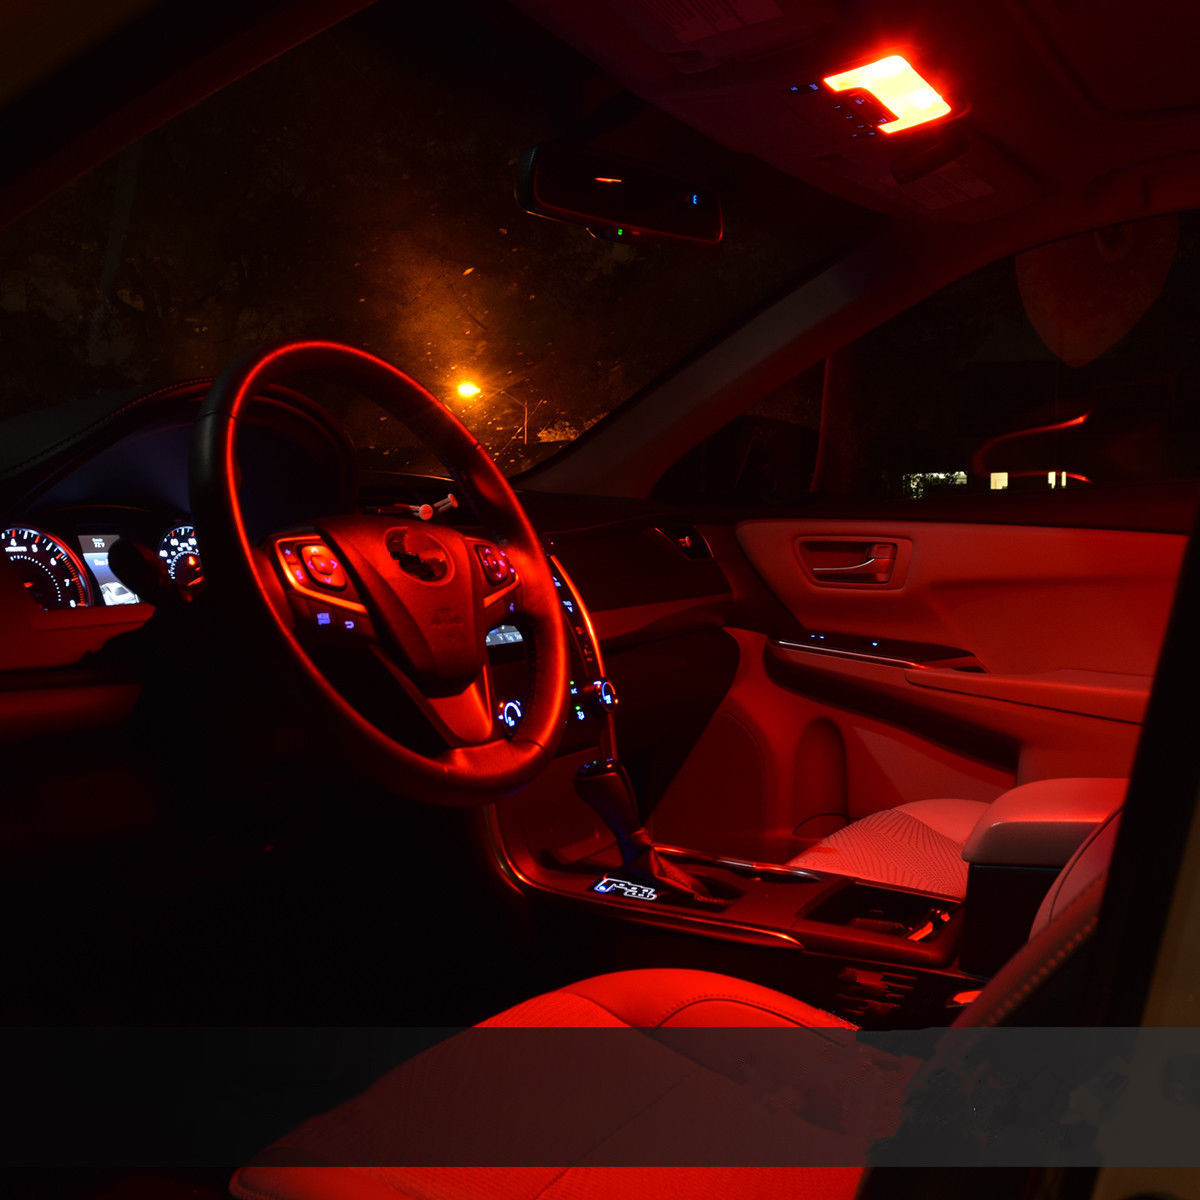 Details About 19x White Bulb Interior Red Led Lights Kit For Benz C Class W204 2008 15